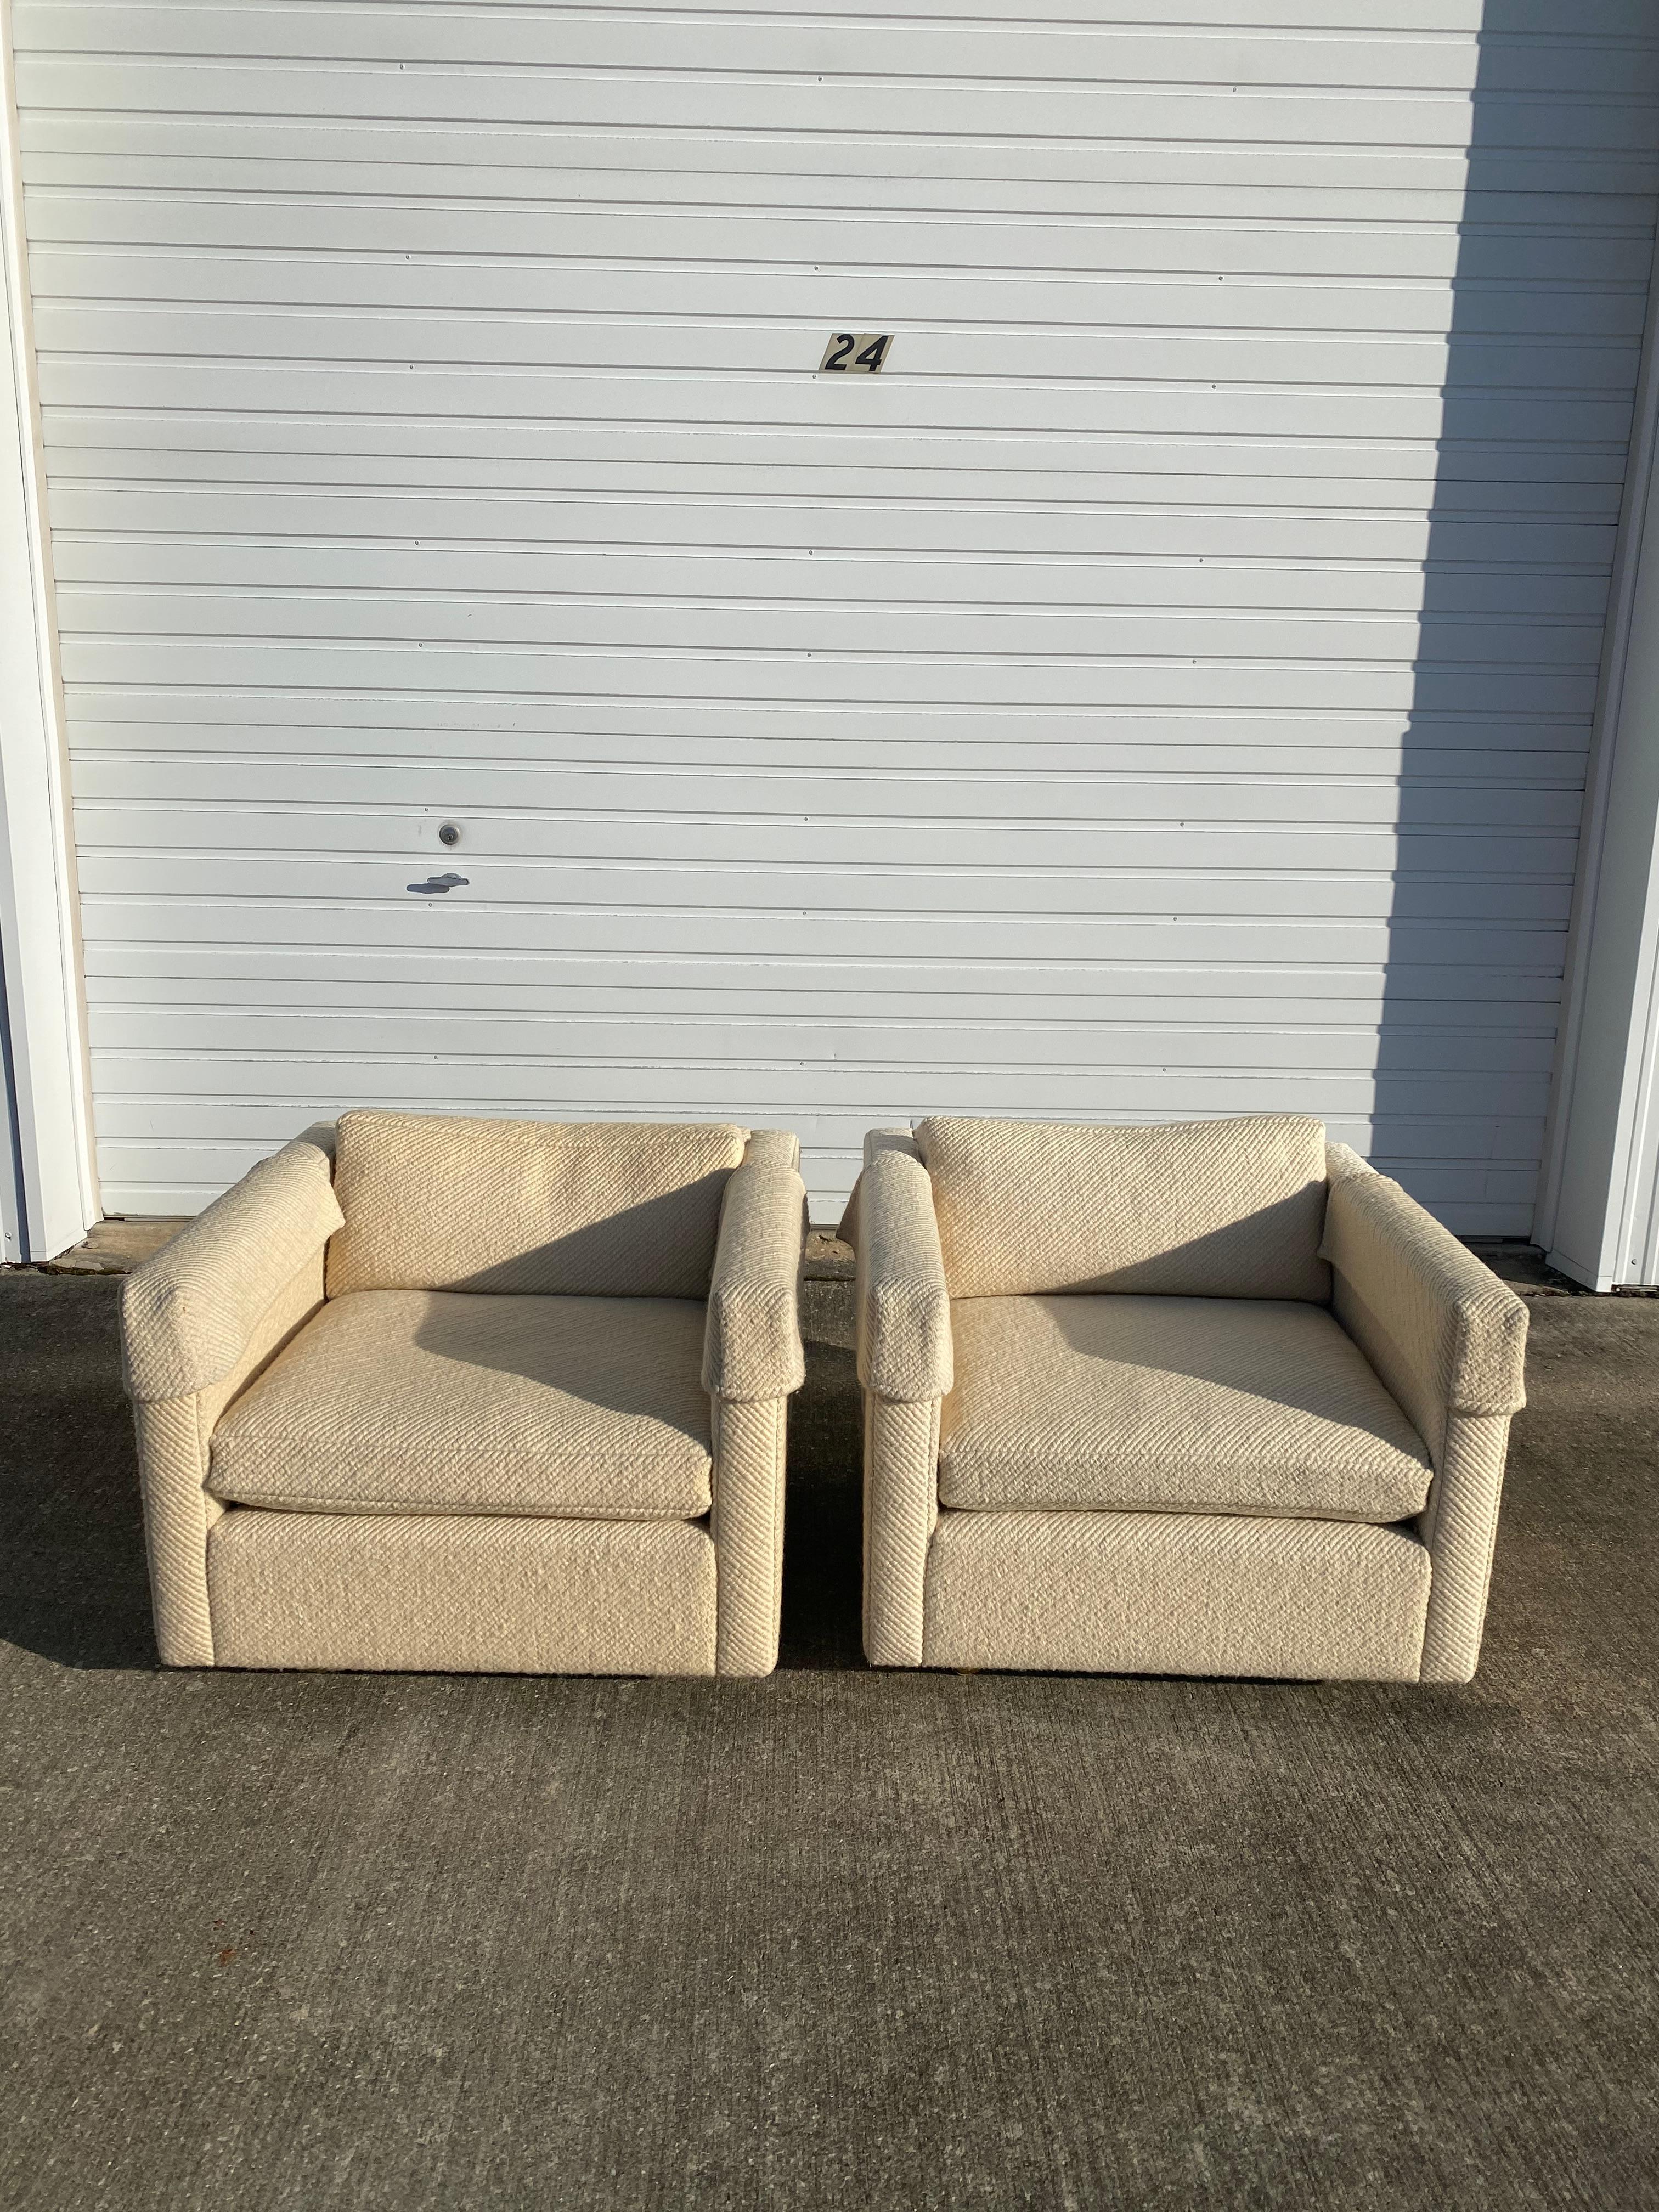 1970s Pair of Charles Pfister Cube Lounge Chairs for Knoll in Original Wool Fabr 5